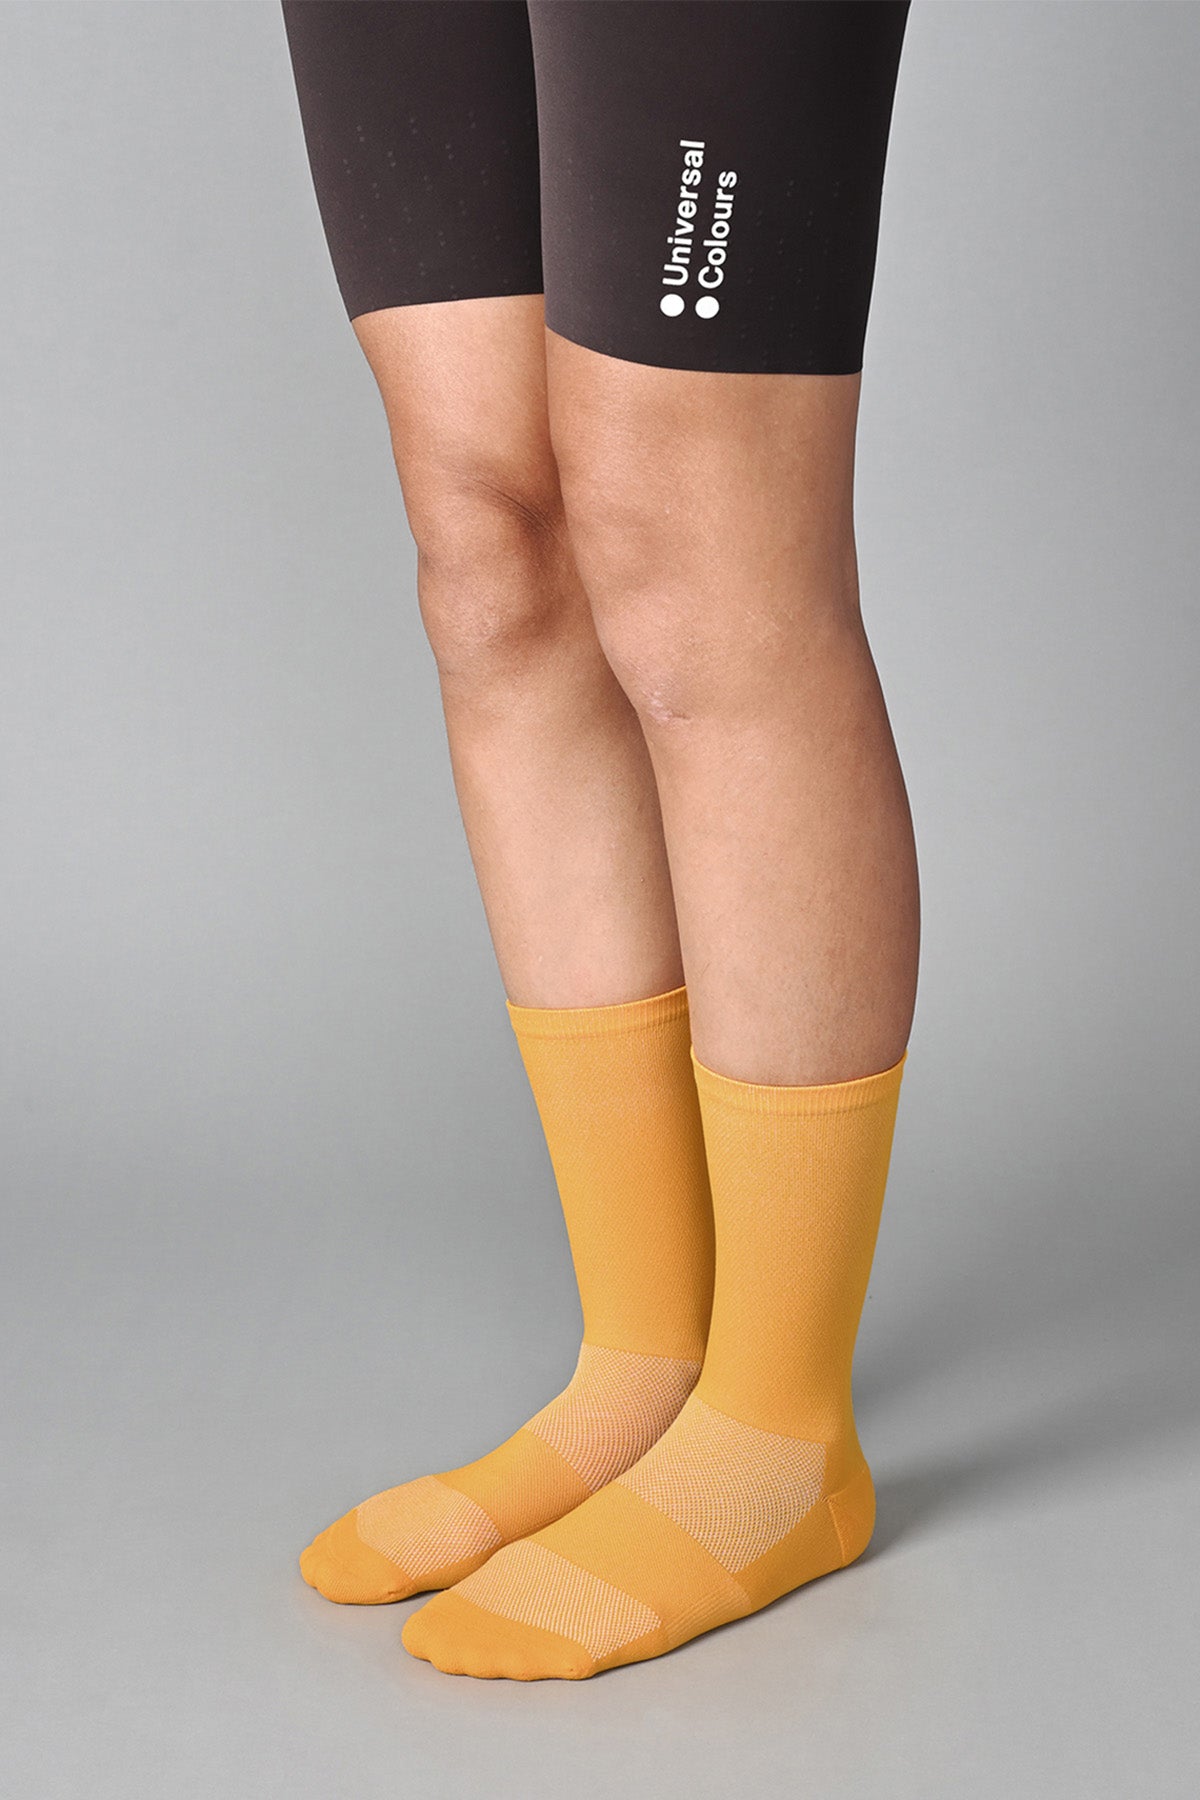 STEALTH - BURNT YELLOW FRONT SIDE | BEST CYCLING SOCKS